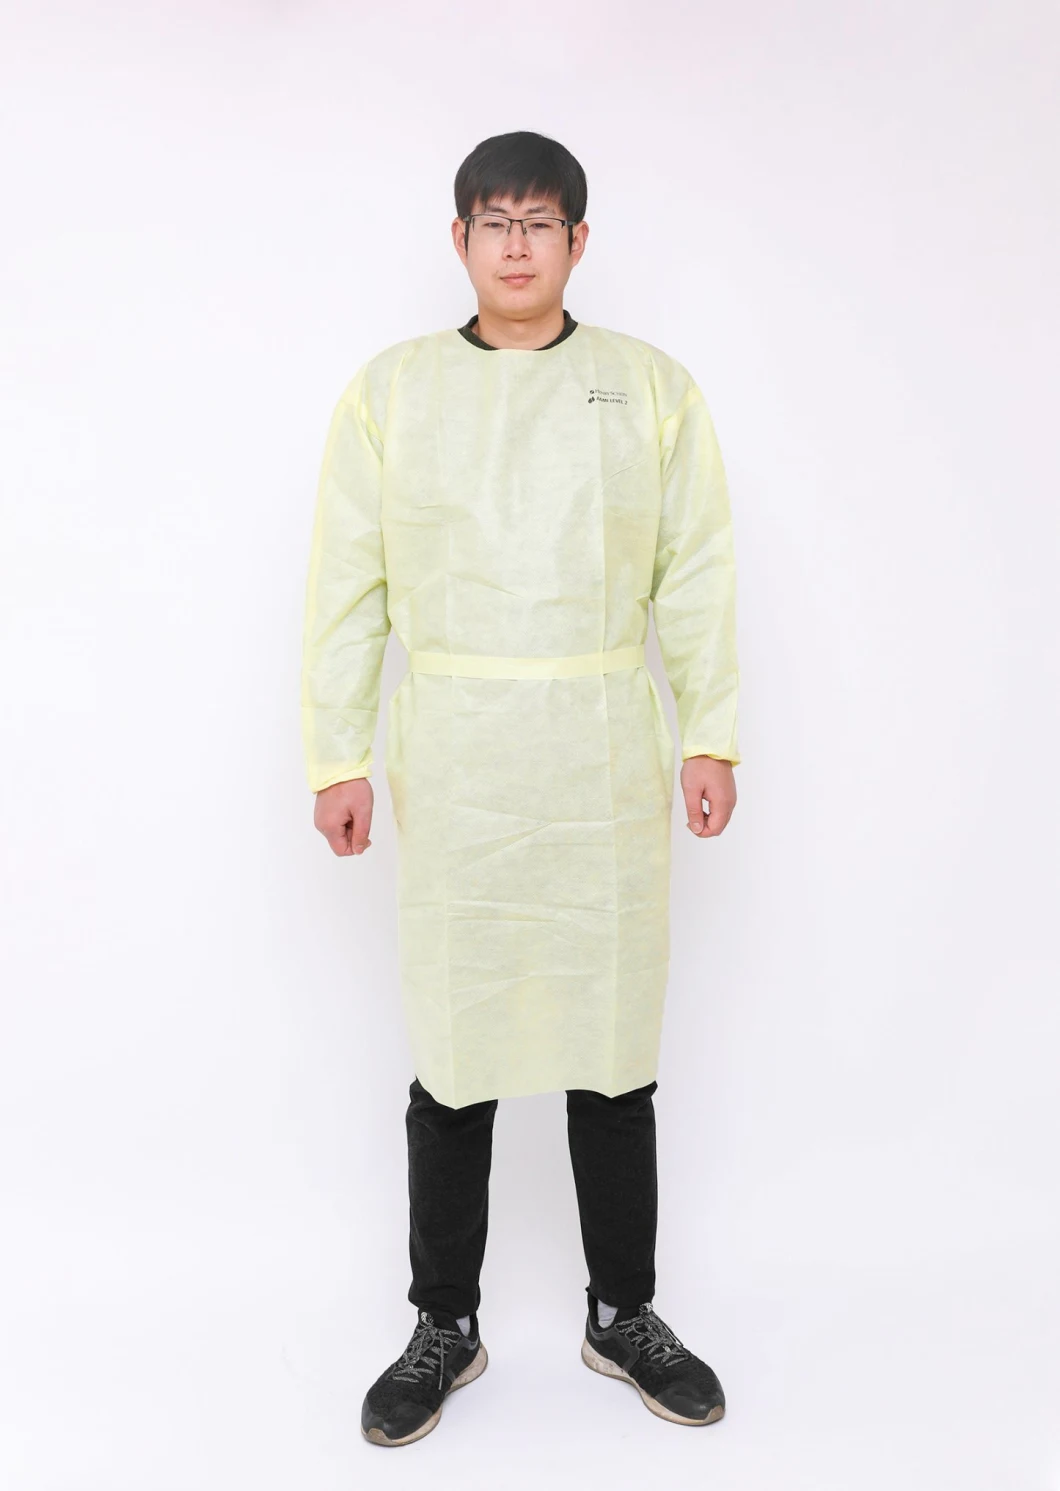 Waterproof Overalls China Manufacturer Cheap Unisex Anti-Static Cleanroom Work Protective Overalls